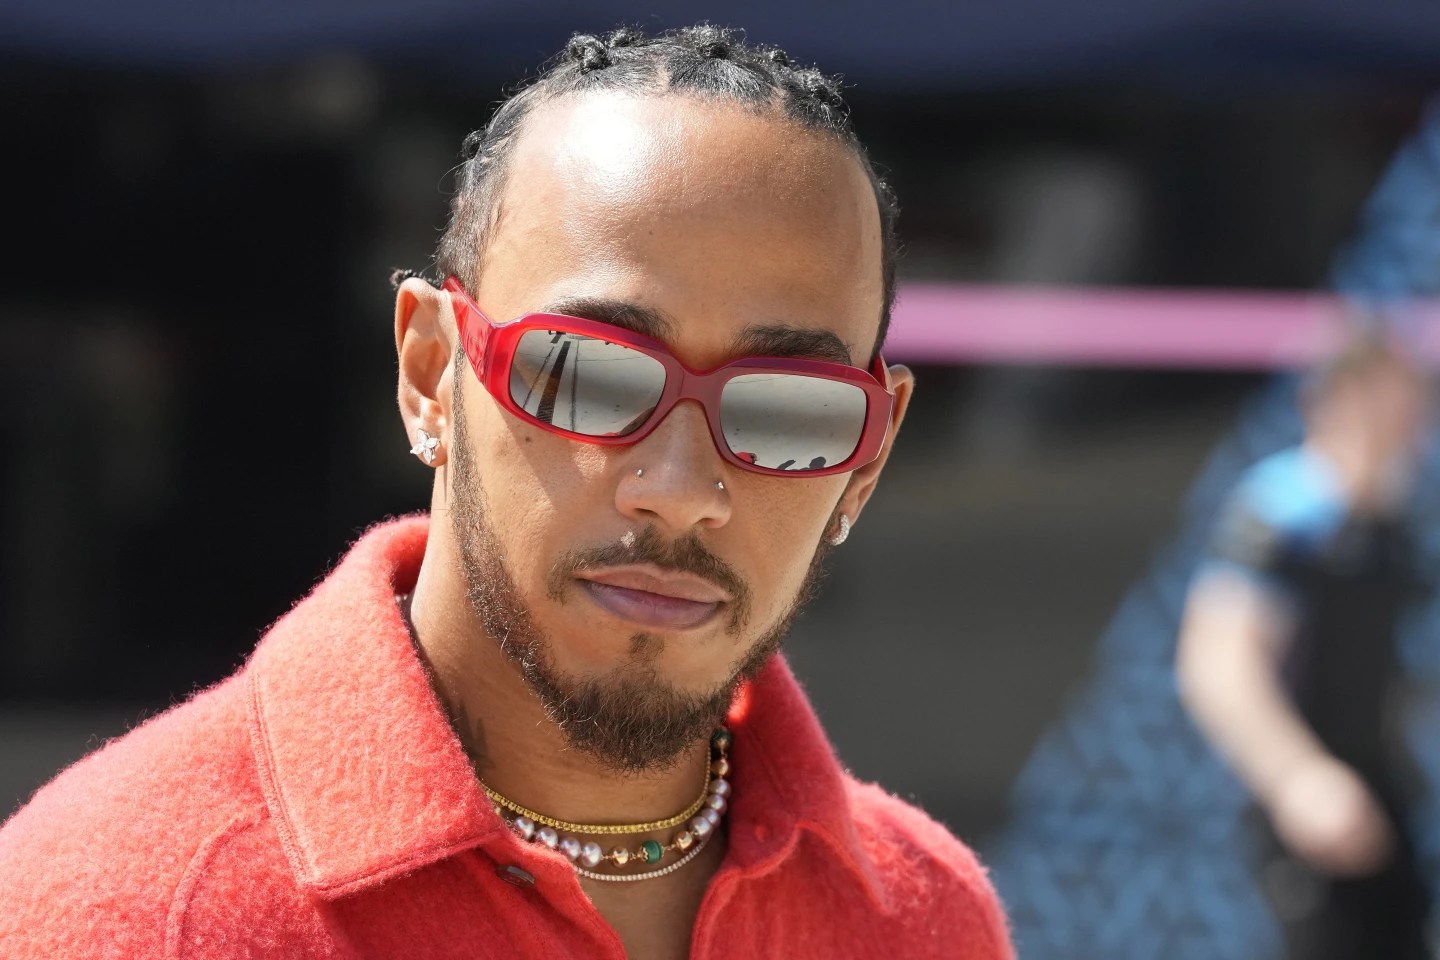 Lewis Hamilton will stay focused on increasing diversity in F1 when he joins Ferrari next year